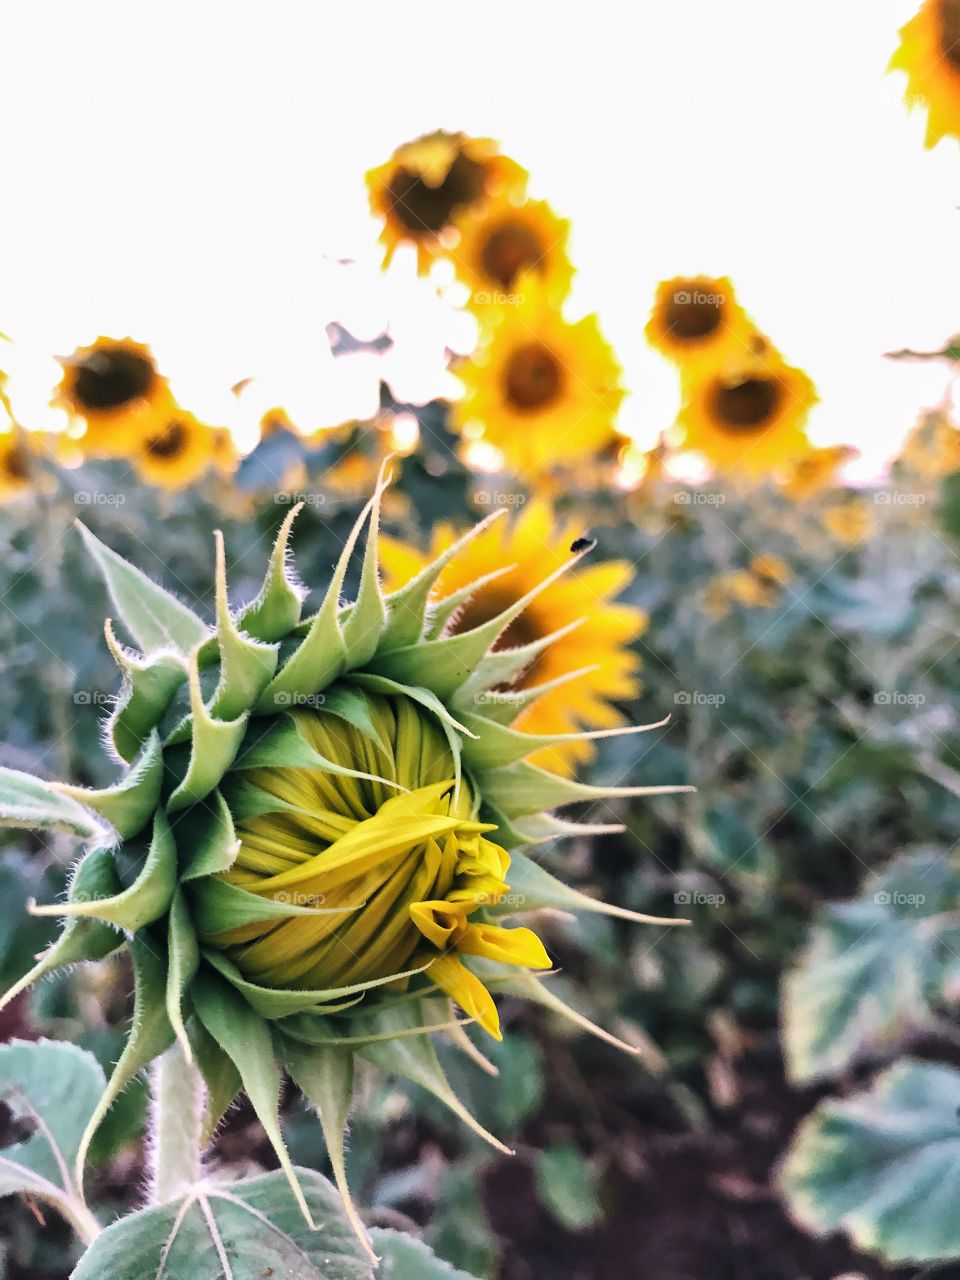 A sunflower blooming in a sunflower field. It is closed for the world yet, but soon, it showed all its beauty and majesty.